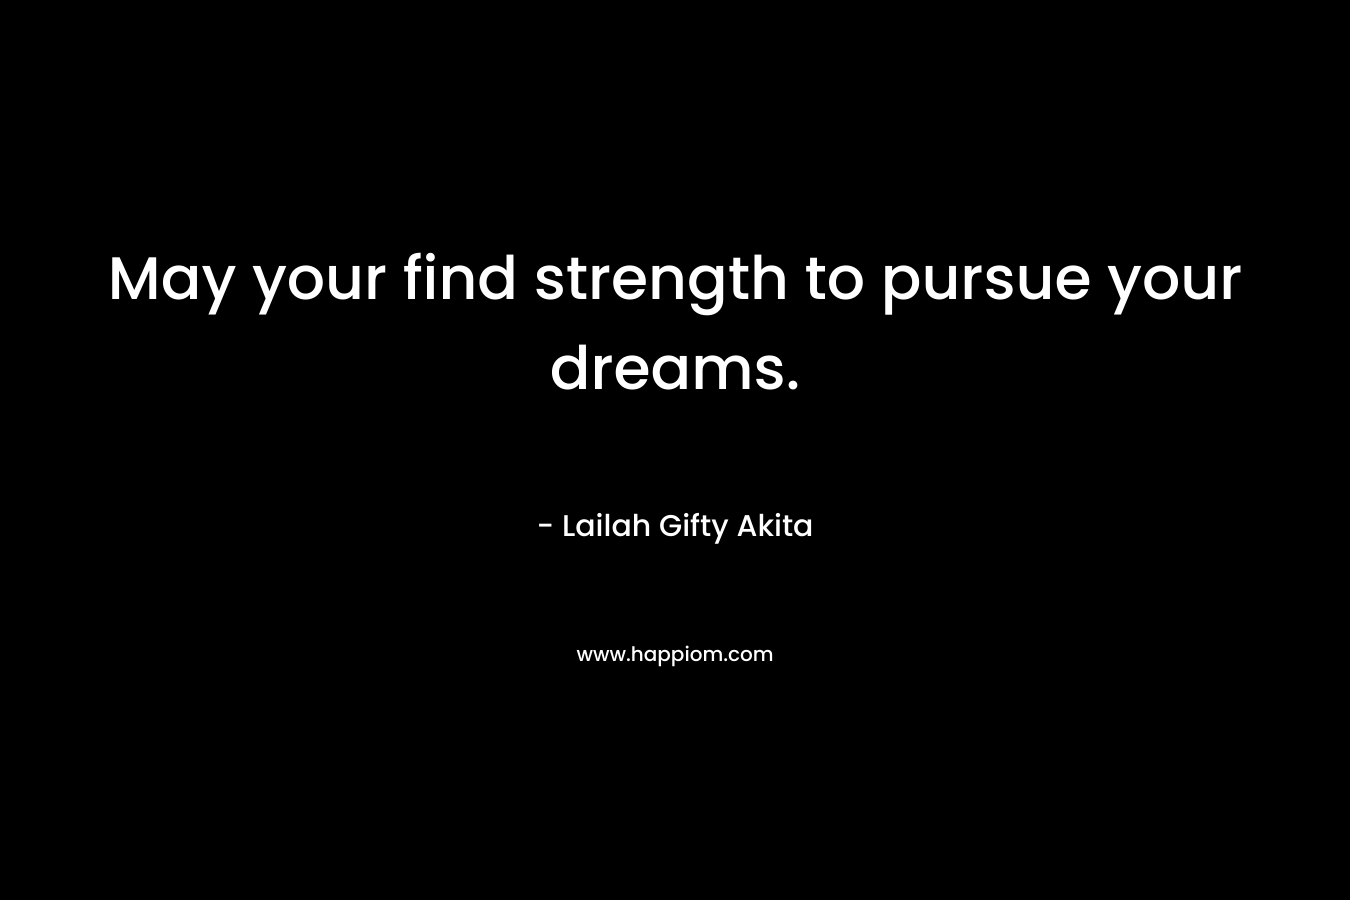 May your find strength to pursue your dreams.